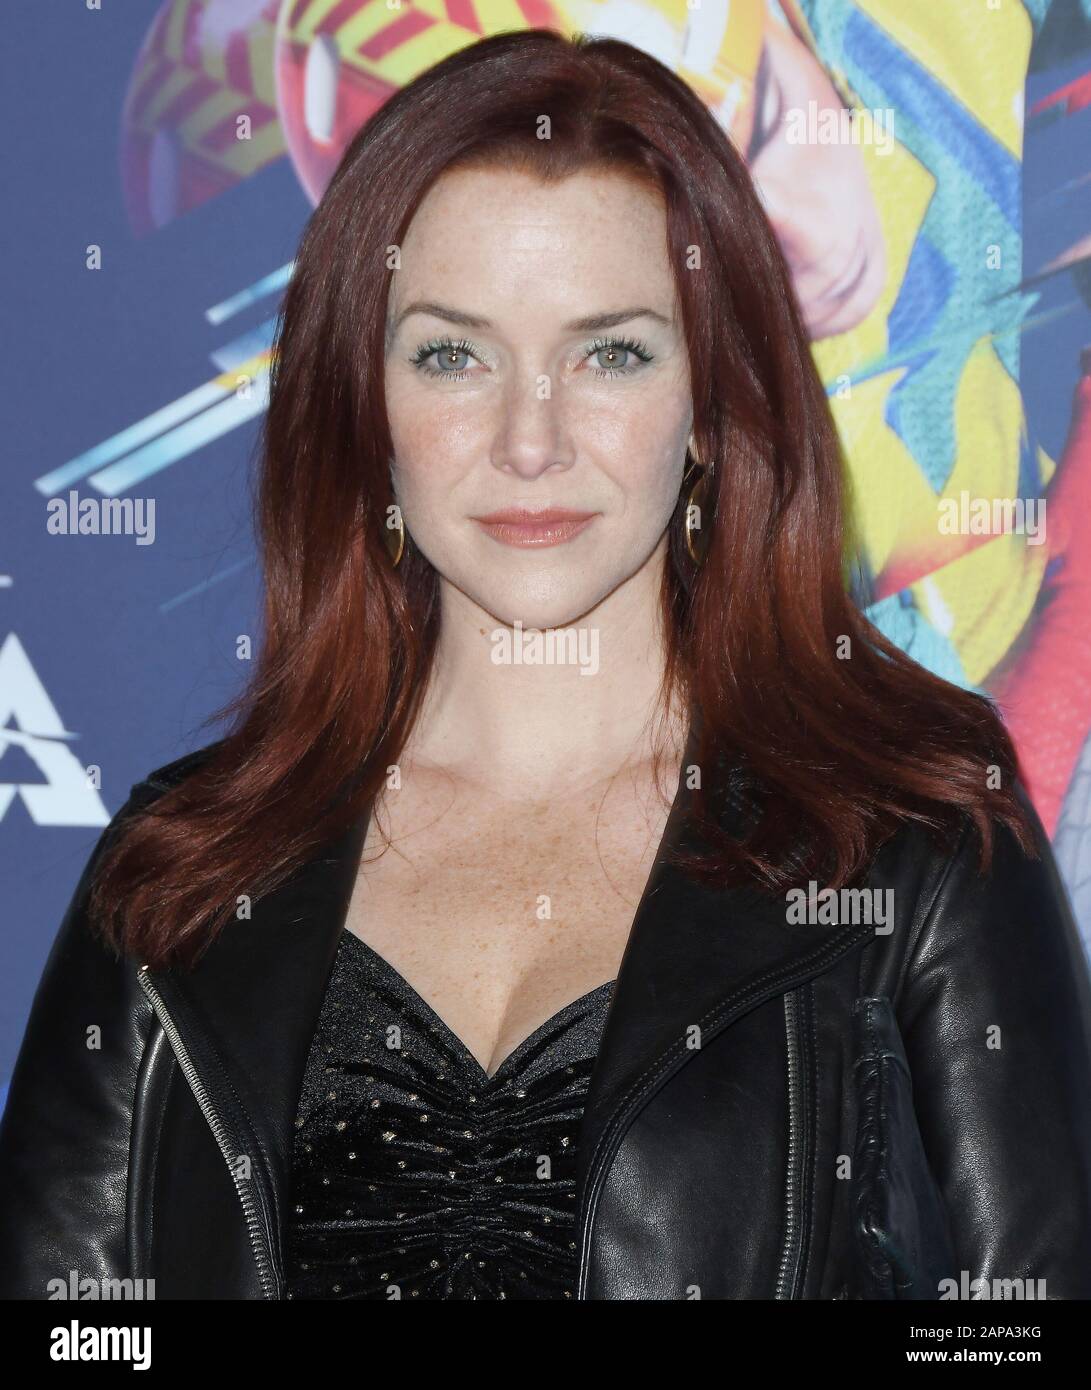 Los Angeles, USA. 21st Jan, 2020. Annie Wersching arrives at the Cirque Du Soleil VOLTA Los Angeles Premiere held at the Dodger Statdium in Los Angeles, CA on Tuesday, ?January 21, 2020. (Photo By Sthanlee B. Mirador/Sipa USA) Credit: Sipa USA/Alamy Live News Stock Photo